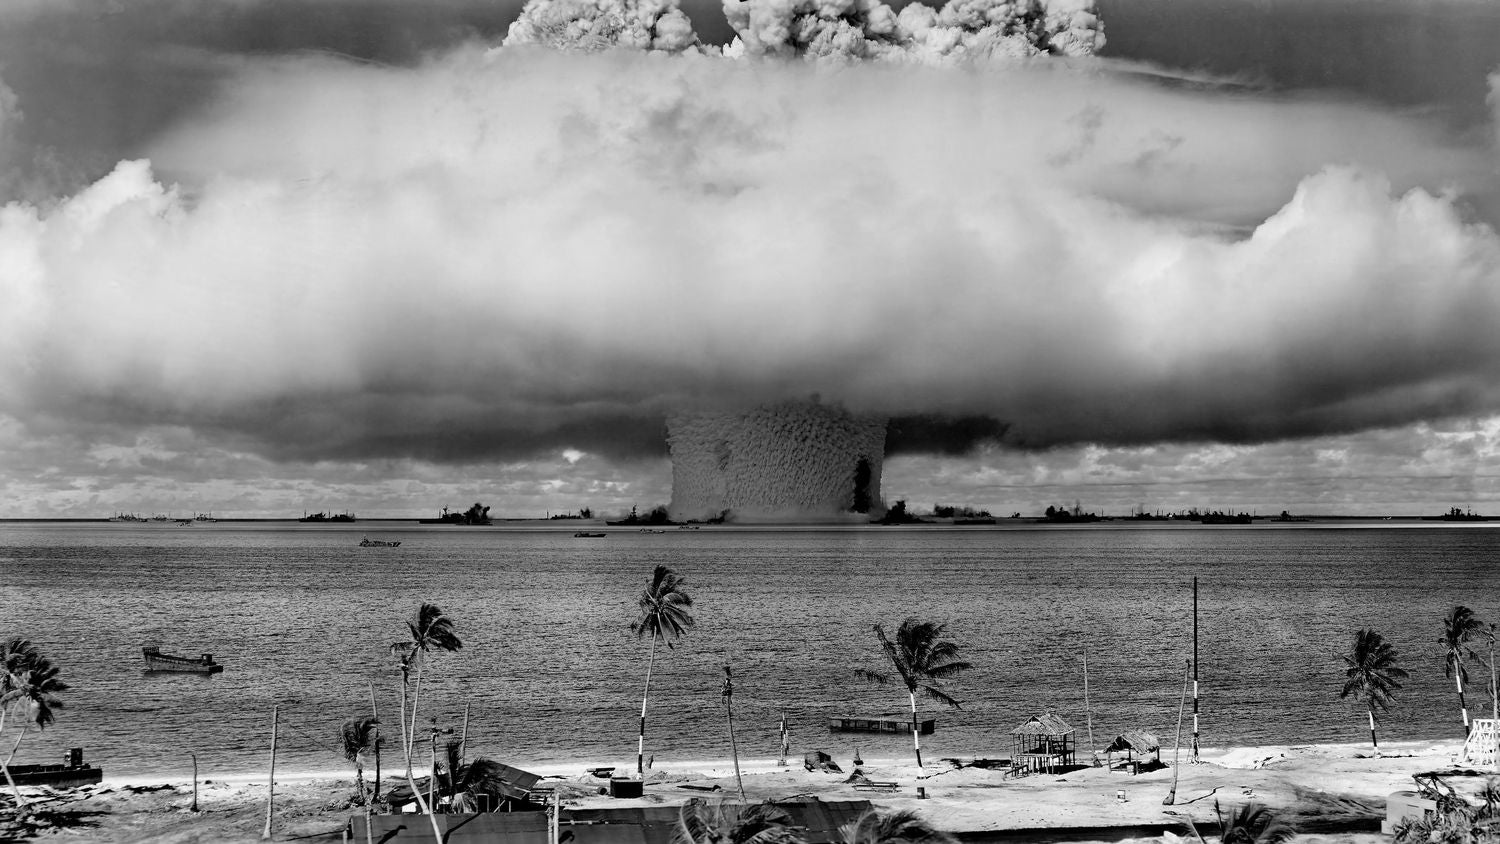 Atomic Bomb On Beach Location With Nearby Boats